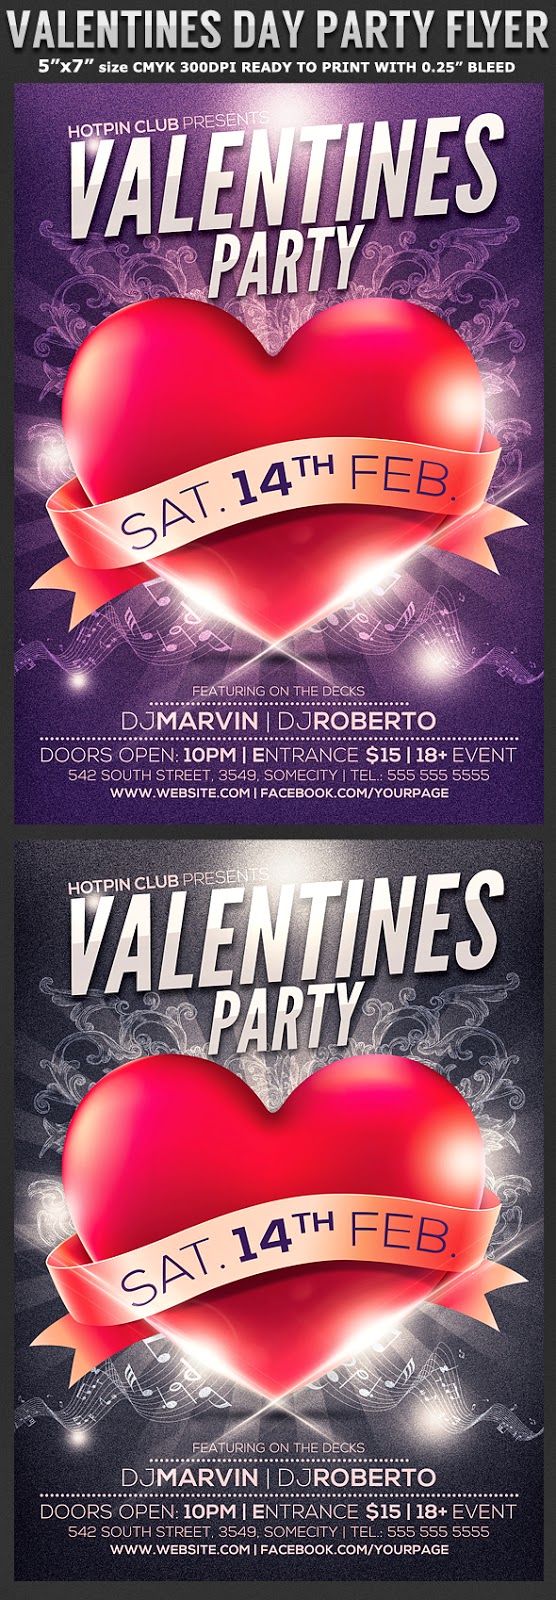  Valentine's Day Party Flyer Template